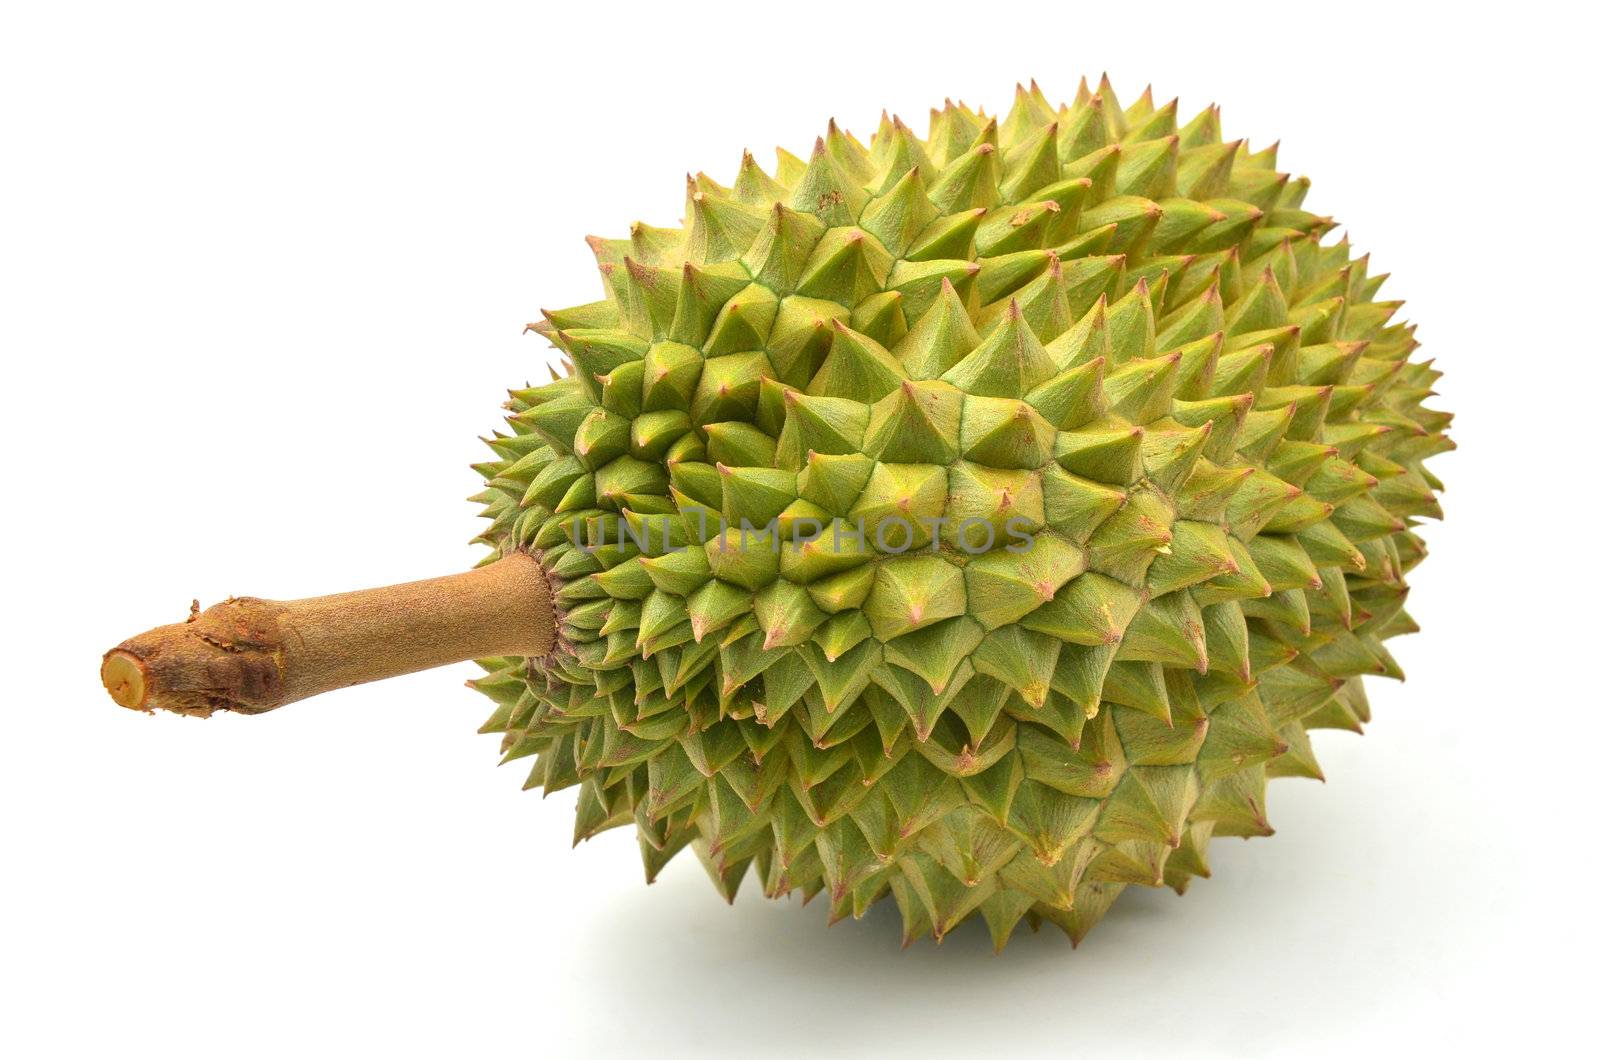 Durian isoltaed on white